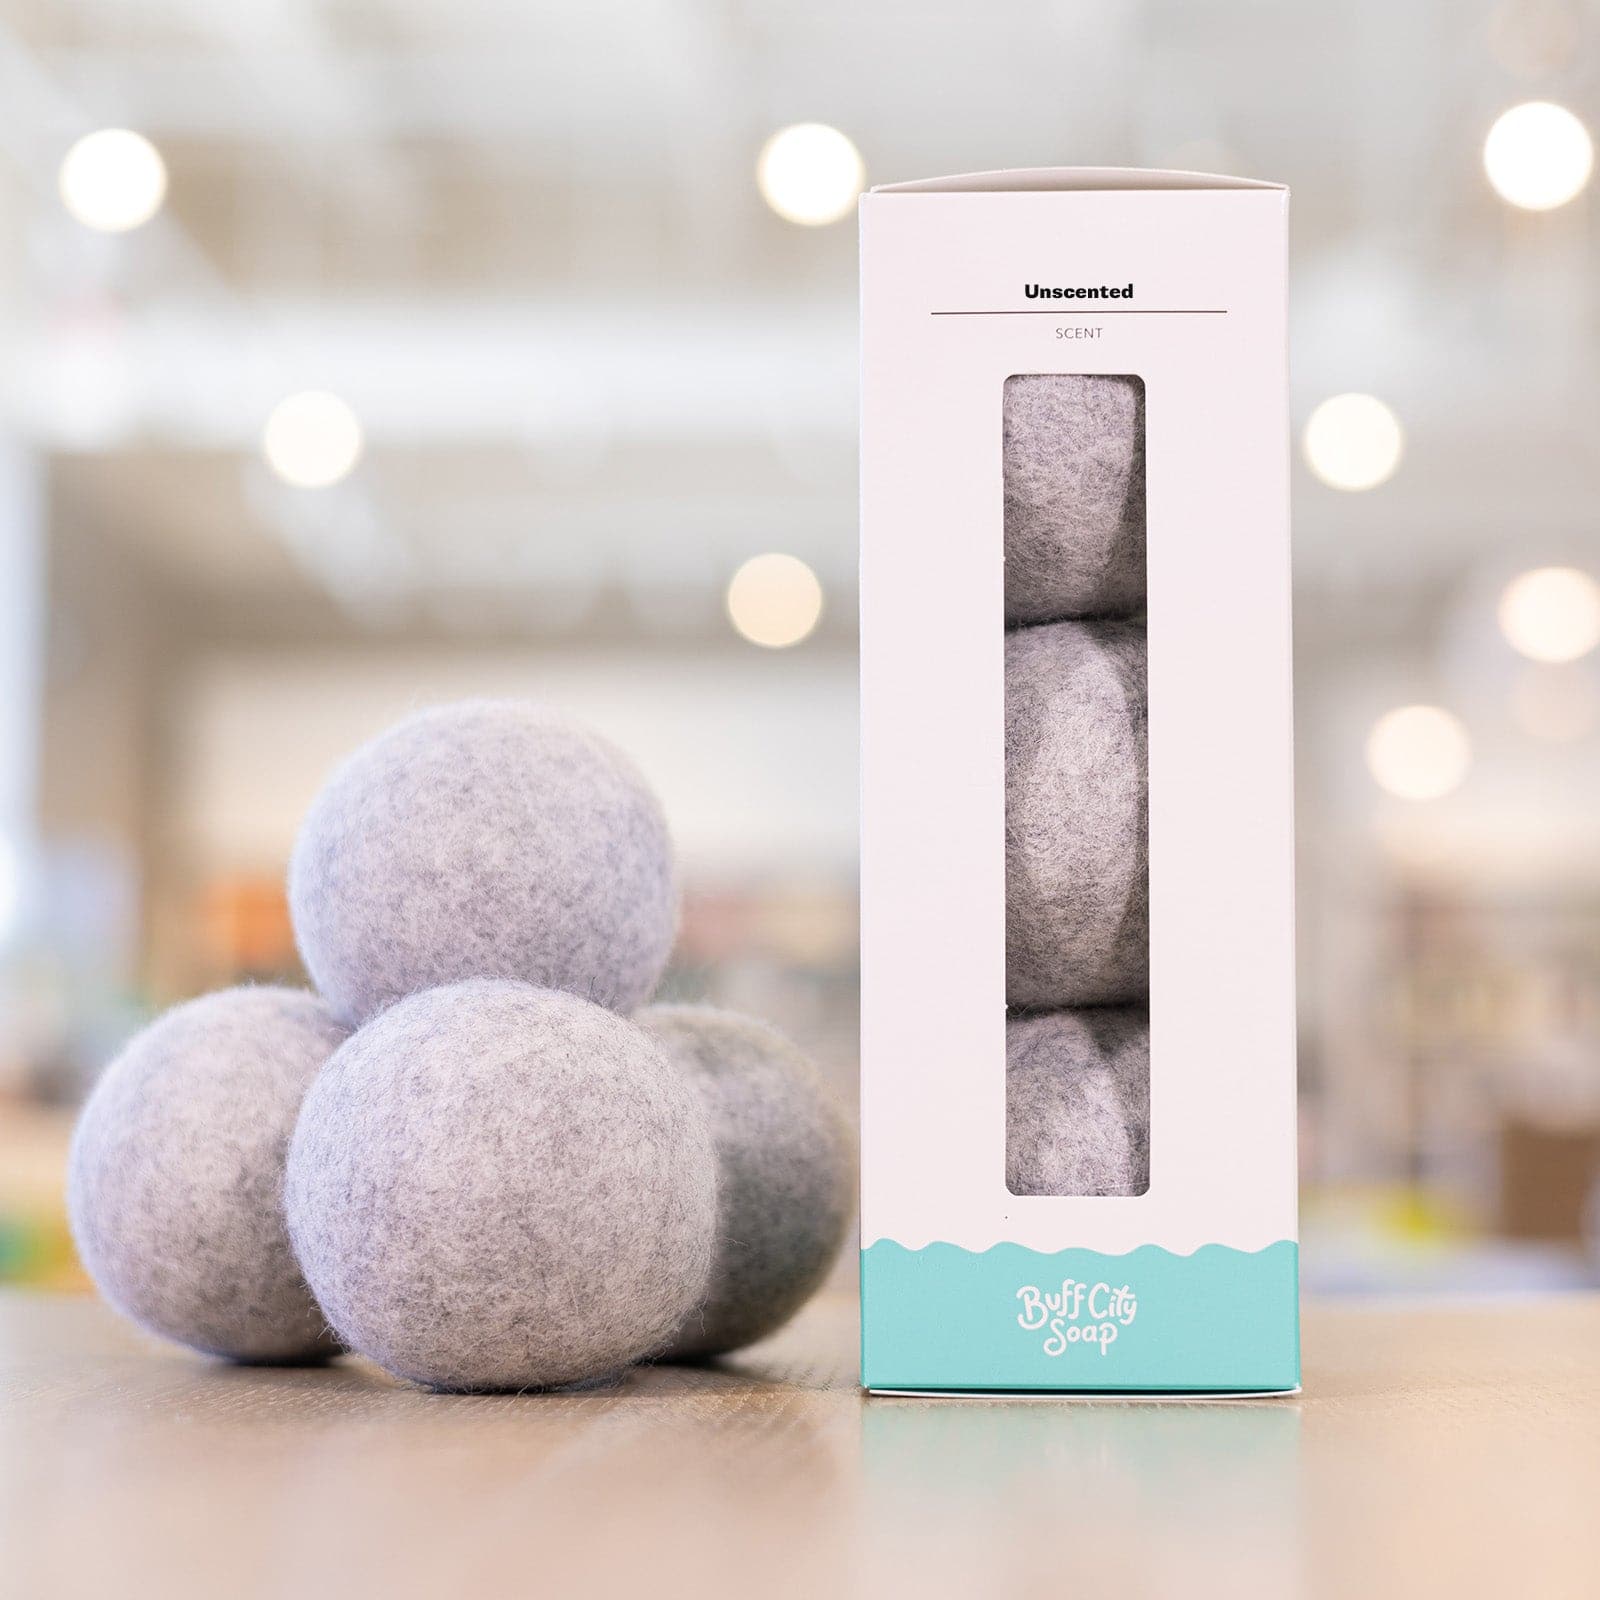 Three gray Unscented Dryer Balls placed next to a box of three Unscented Dryer Balls 